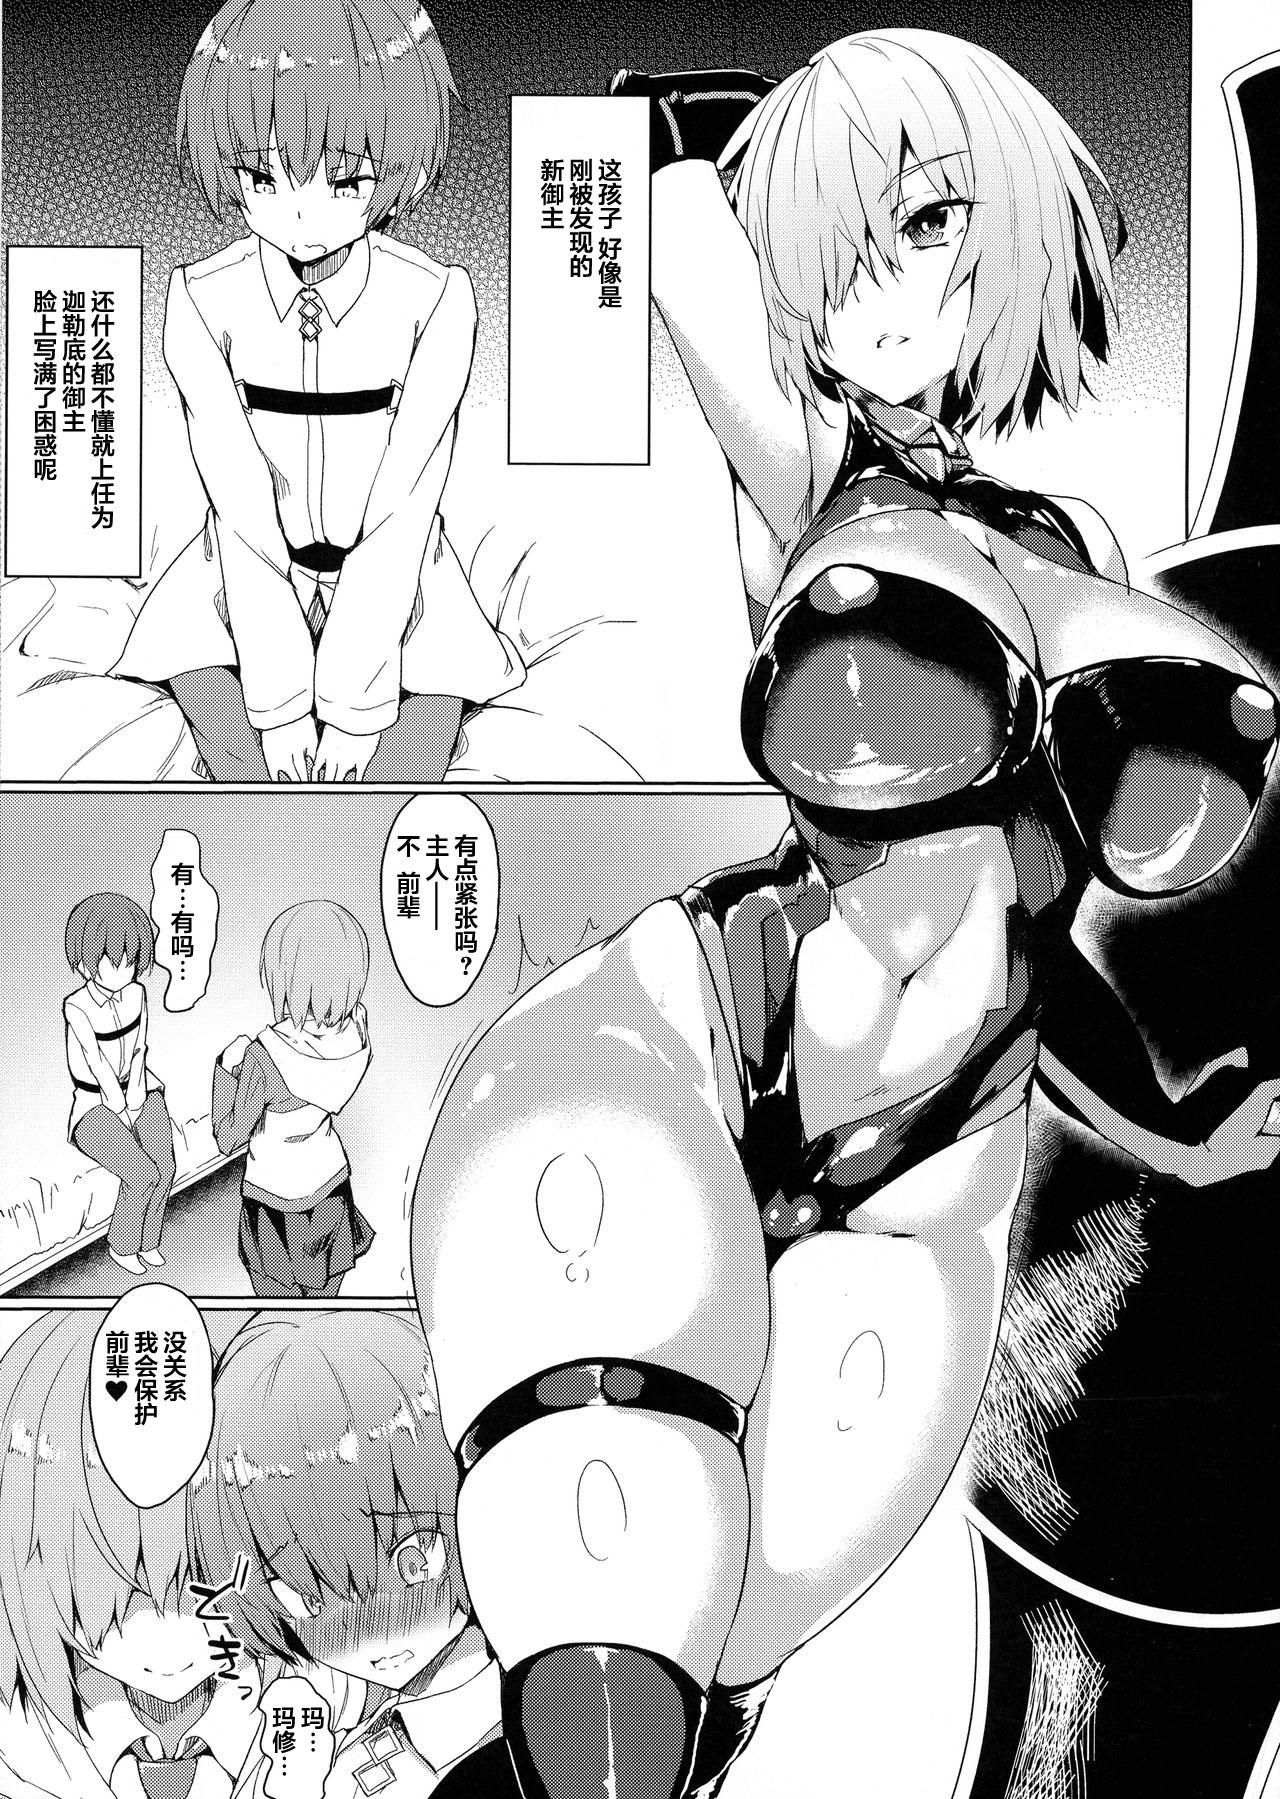 Nudity Mash Onee-chan to Shota Master - Fate grand order Striptease - Page 6